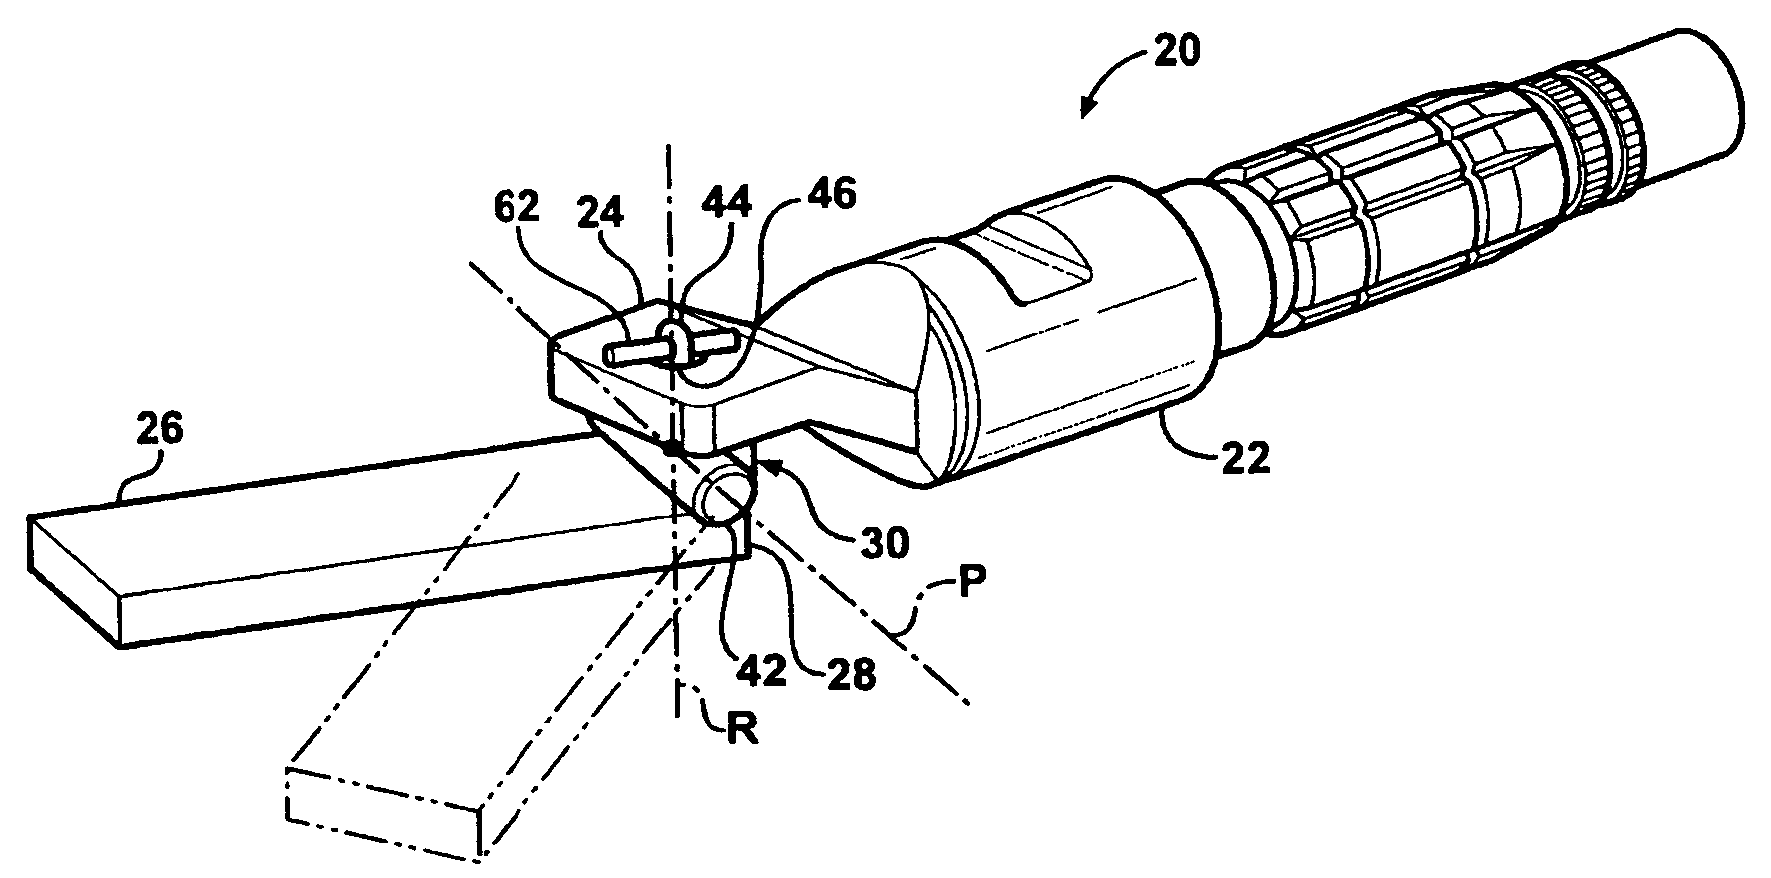 Shaft assembly with lash free bipot joint connection